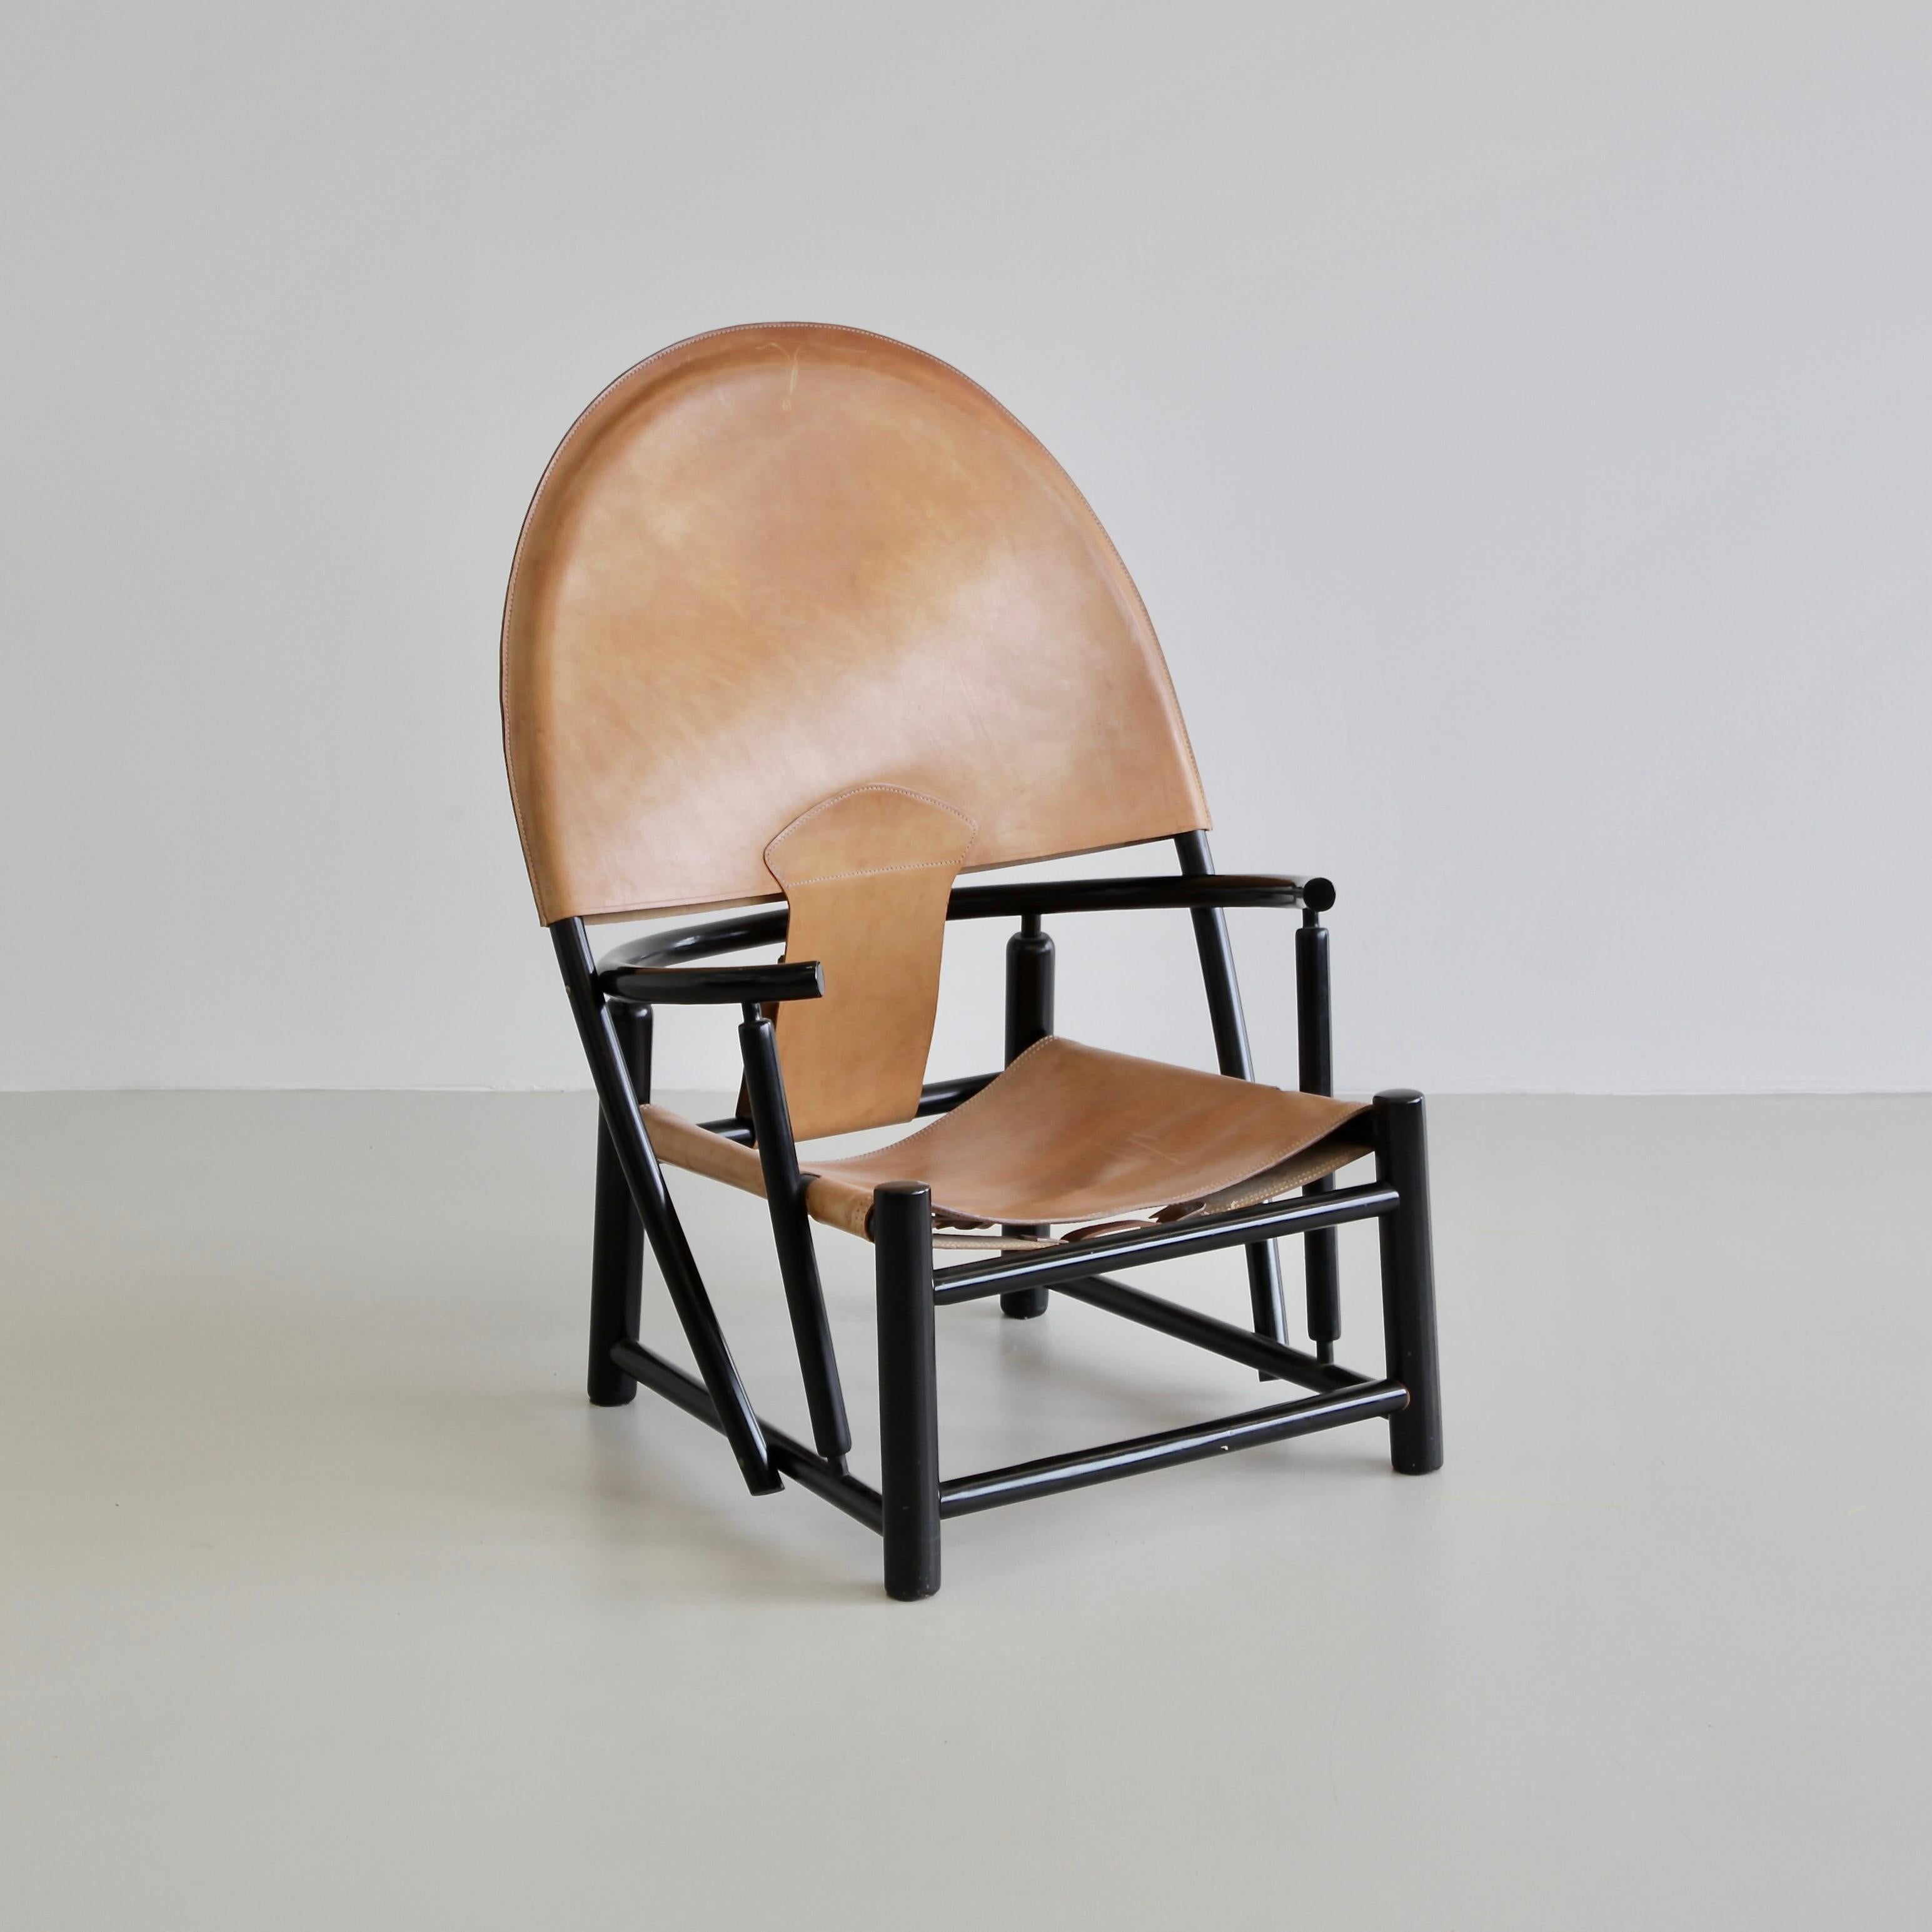 Hoop Armchair by Palange & Toffoloni In Good Condition For Sale In Berlin, Berlin